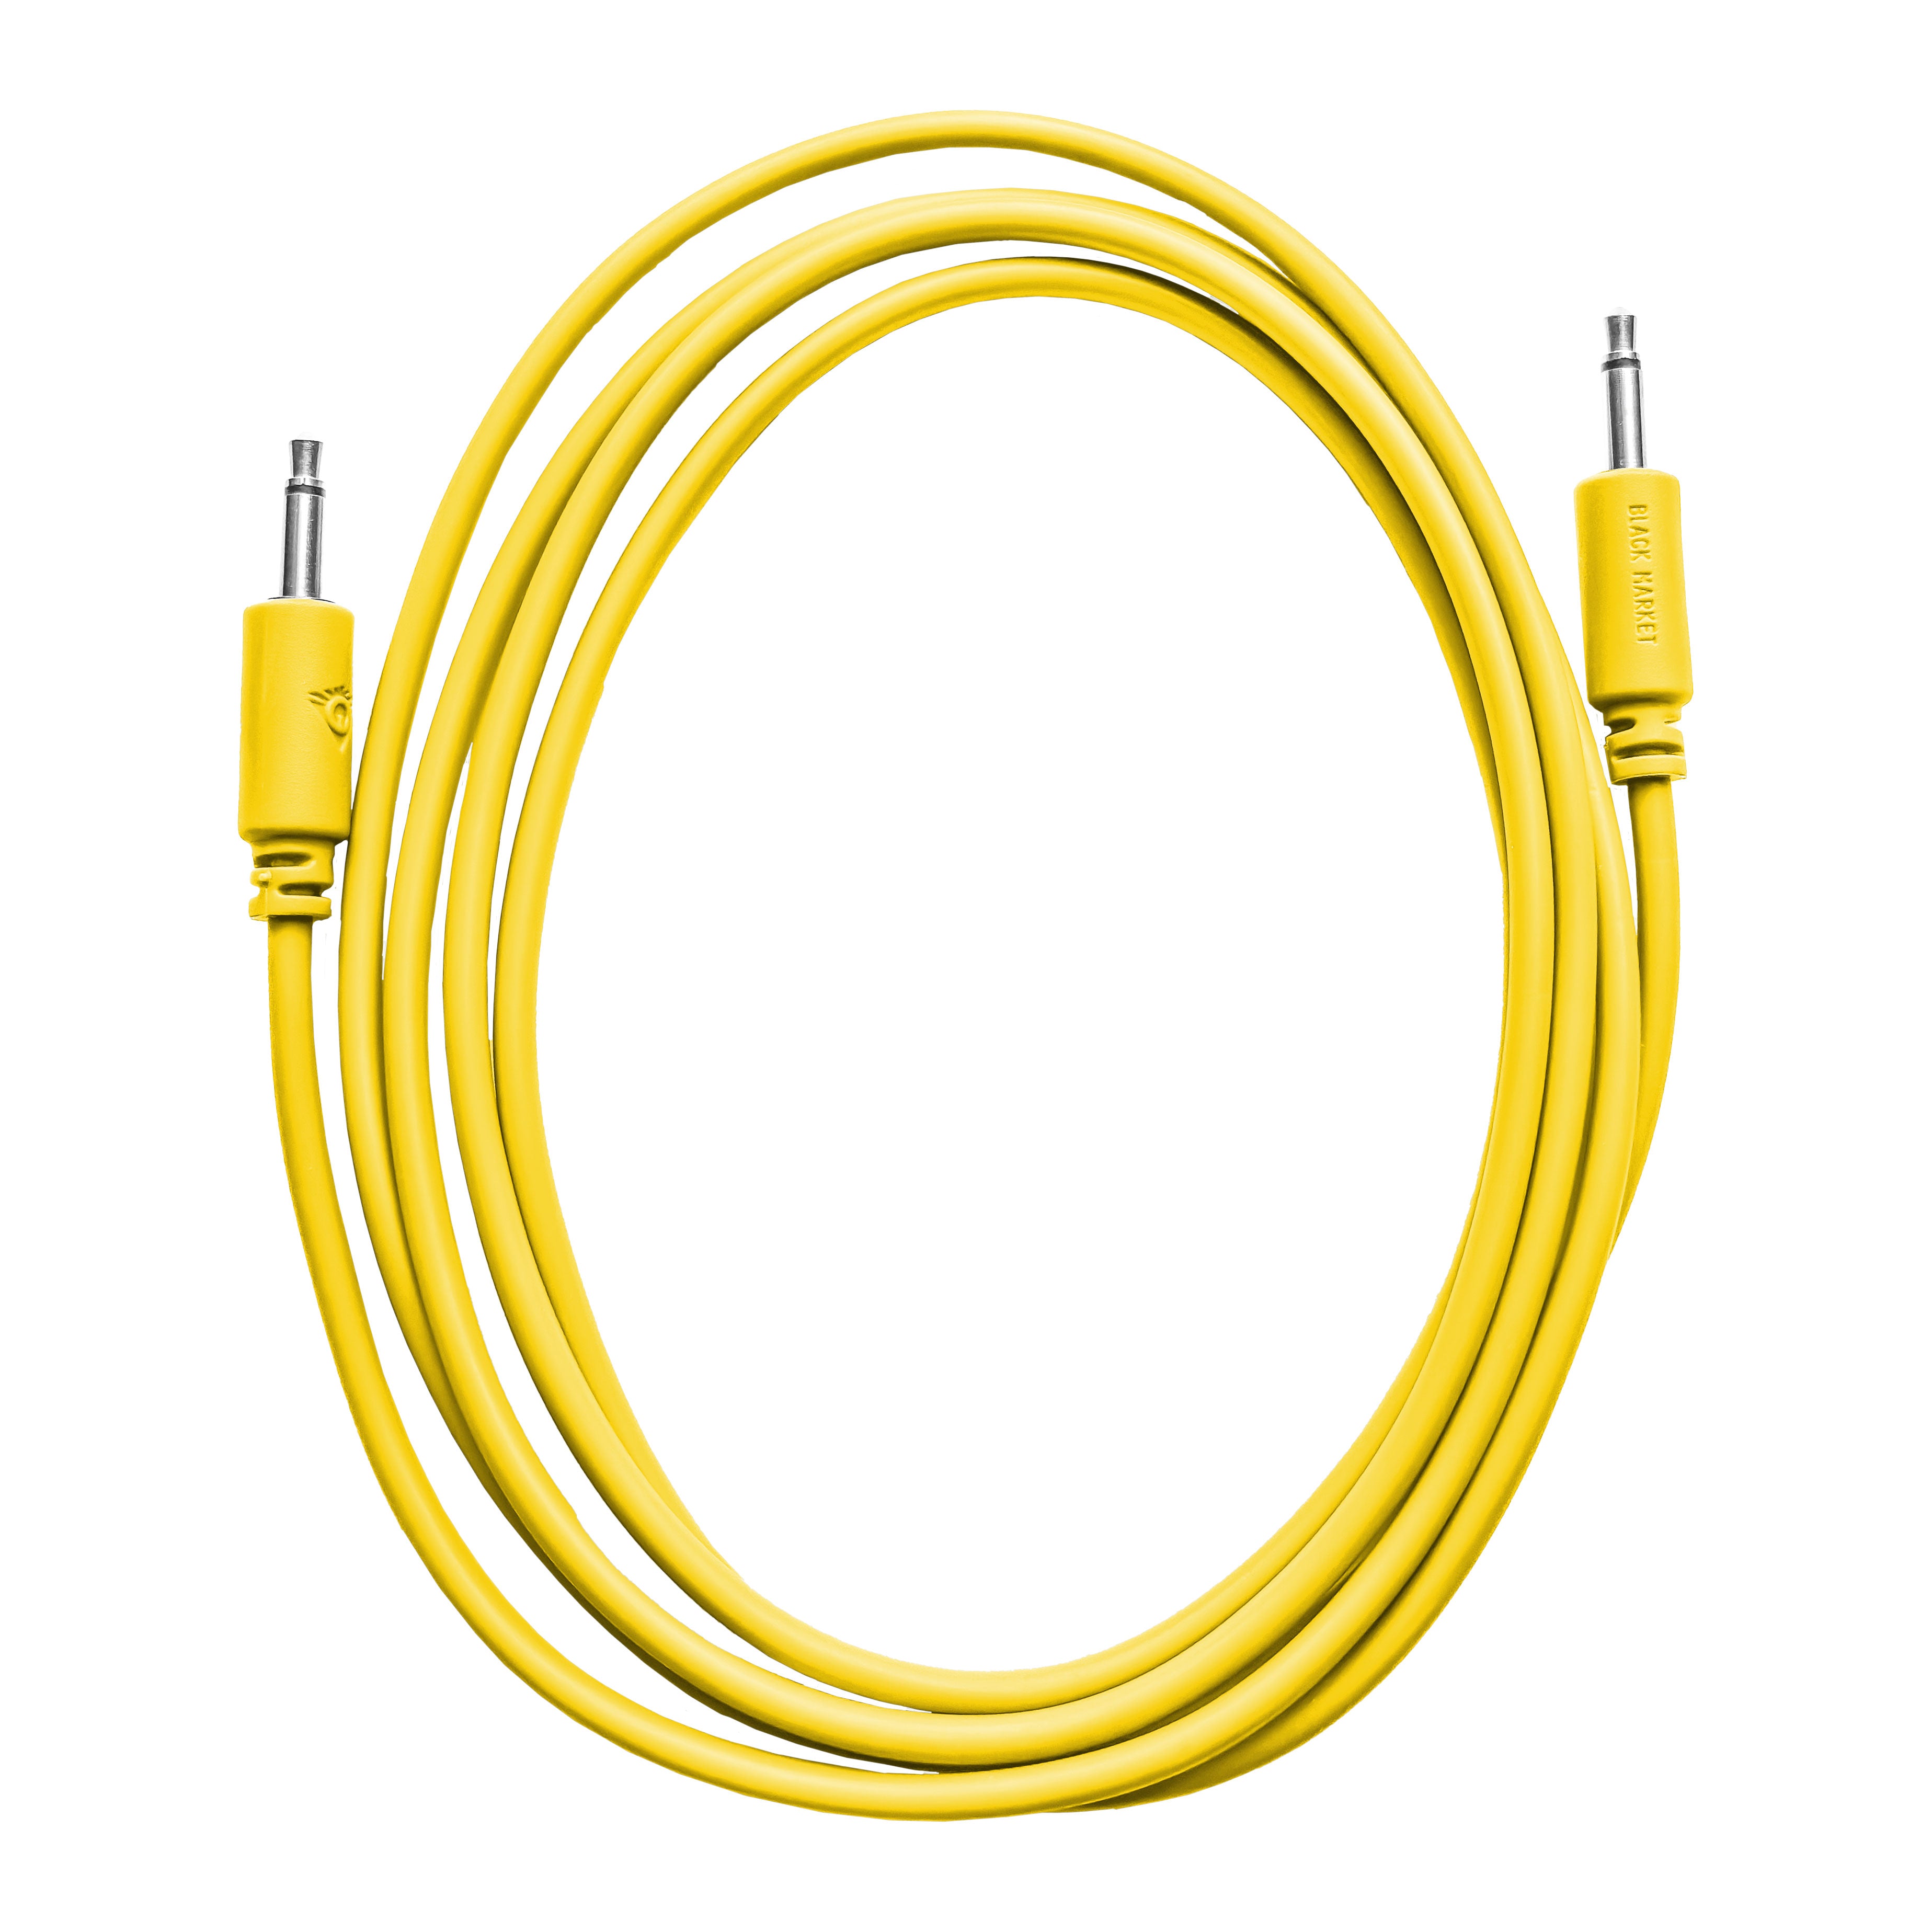 Black Market Modular 3.5mm Patch Cable - 100cm/40" - Yellow View 1